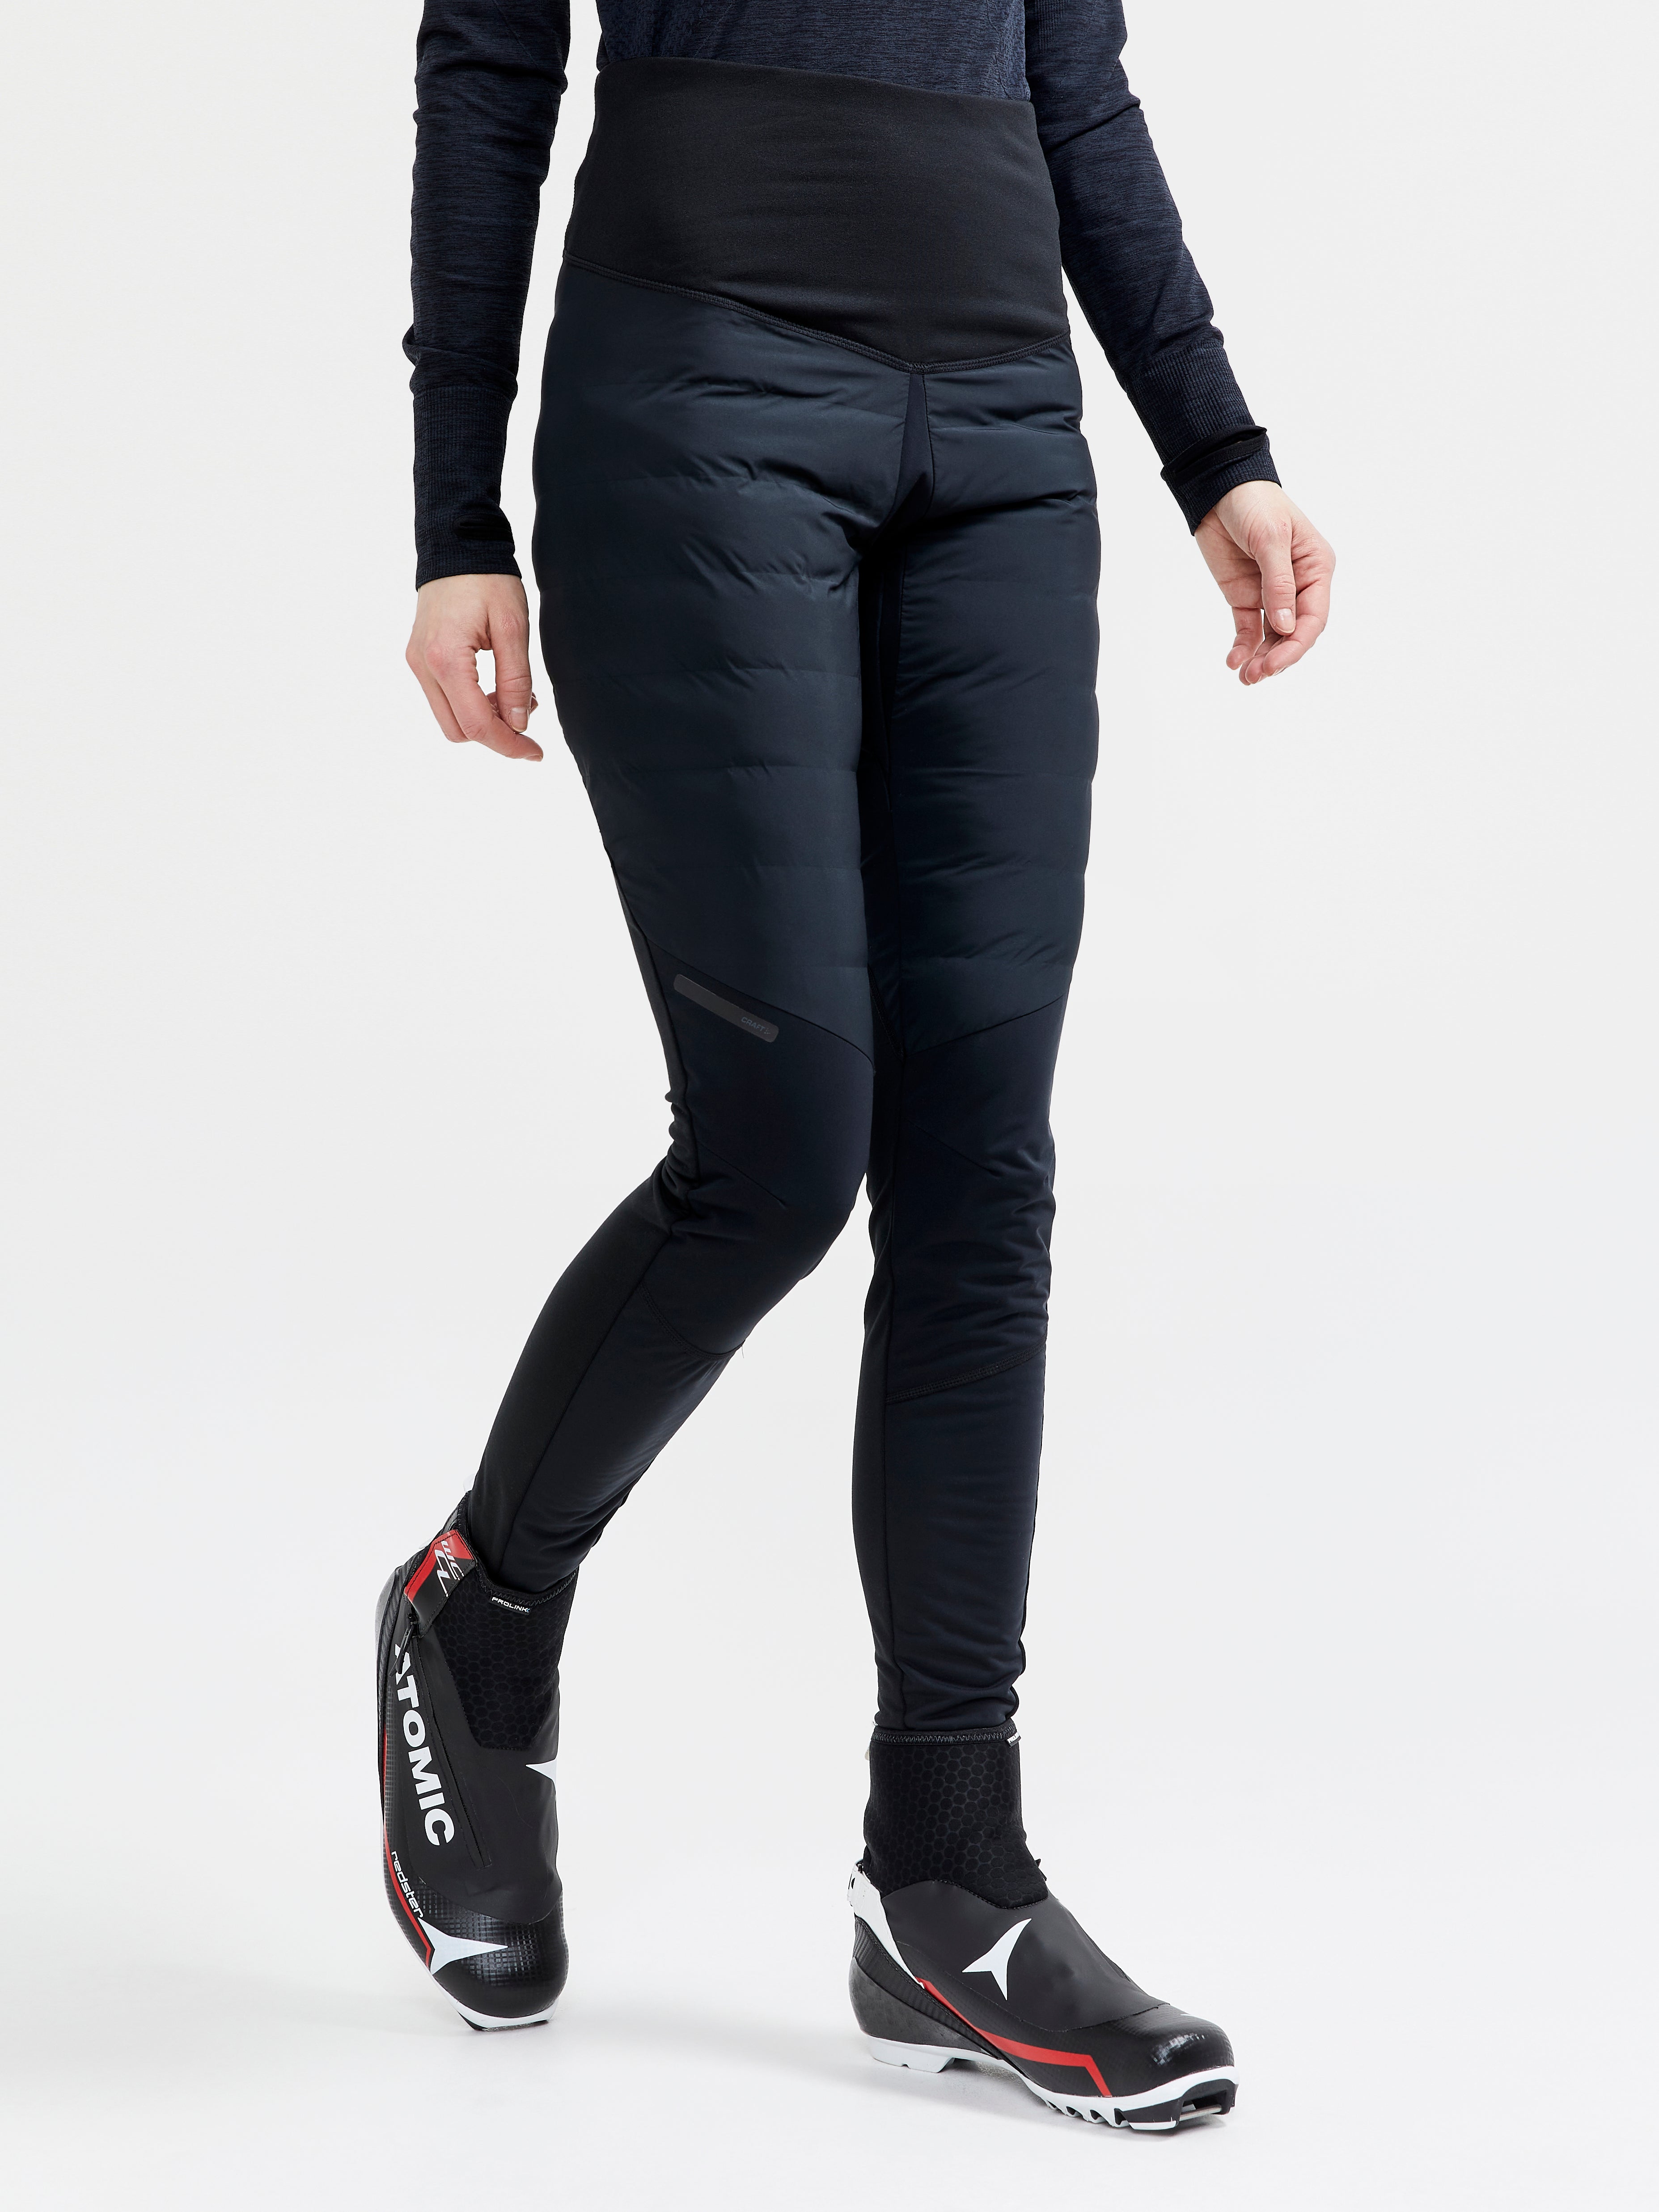 ADV Pursuit Thermal Tights